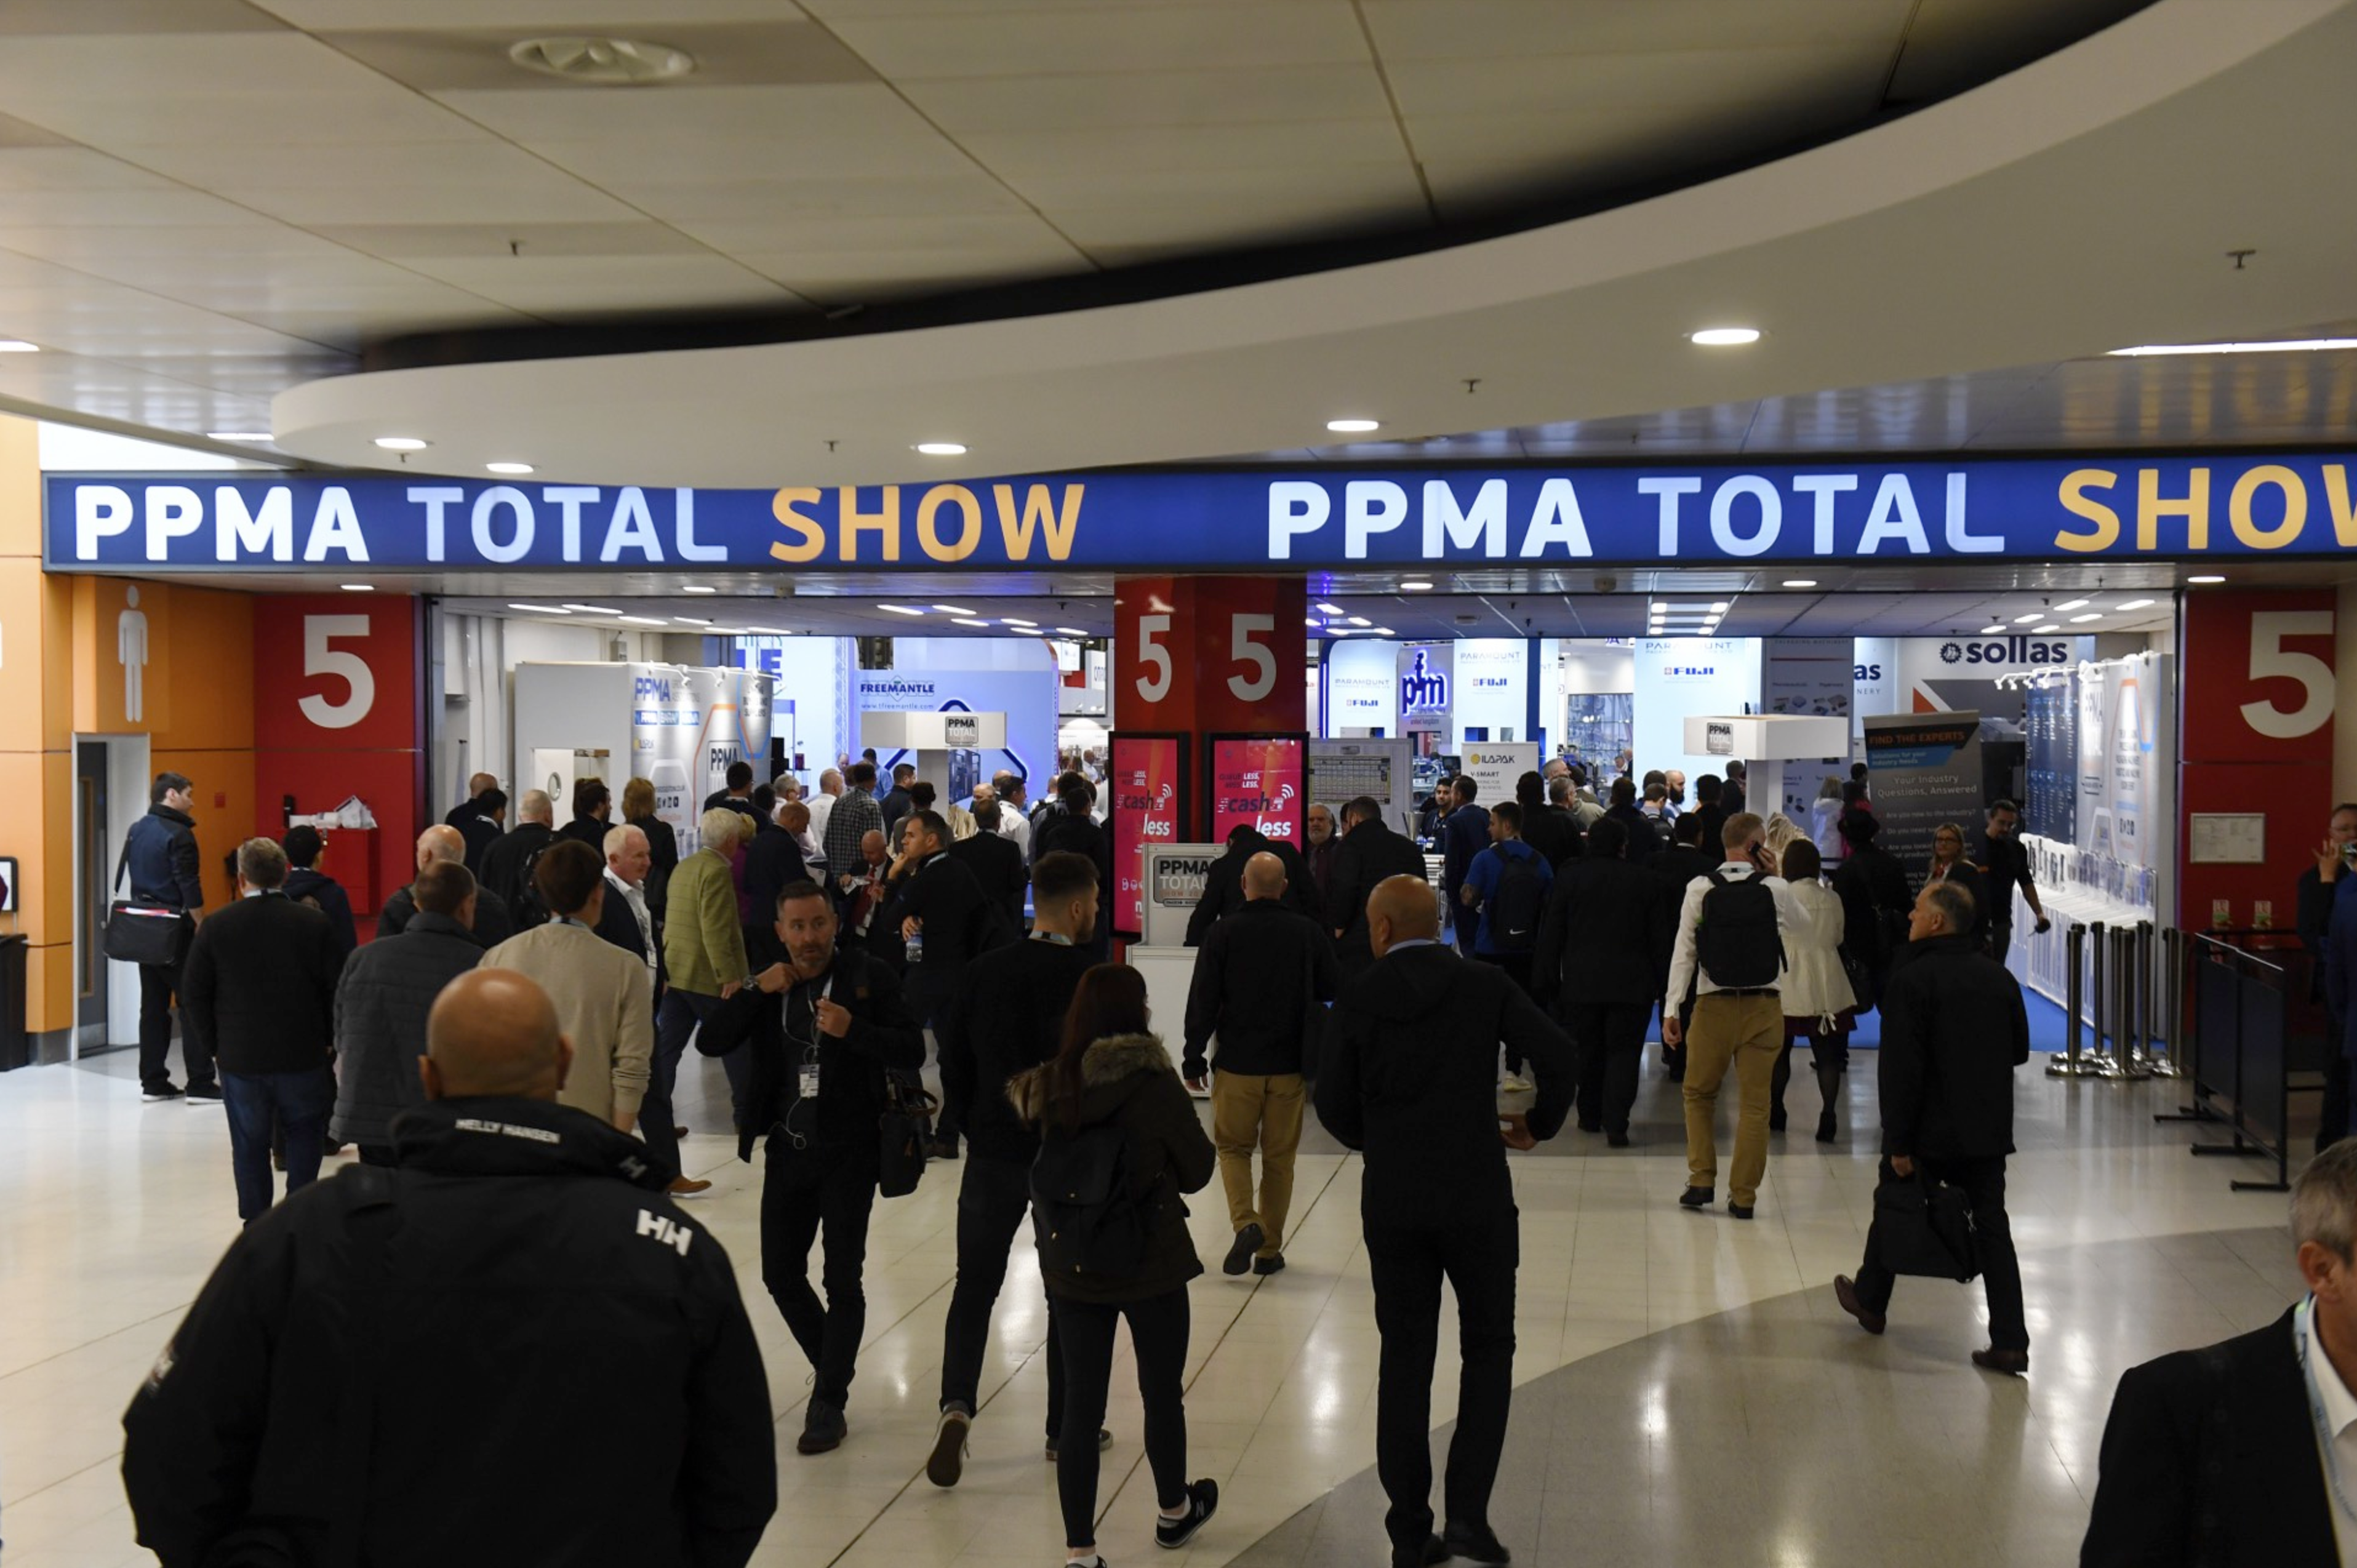 PPMA TOTAL SHOW